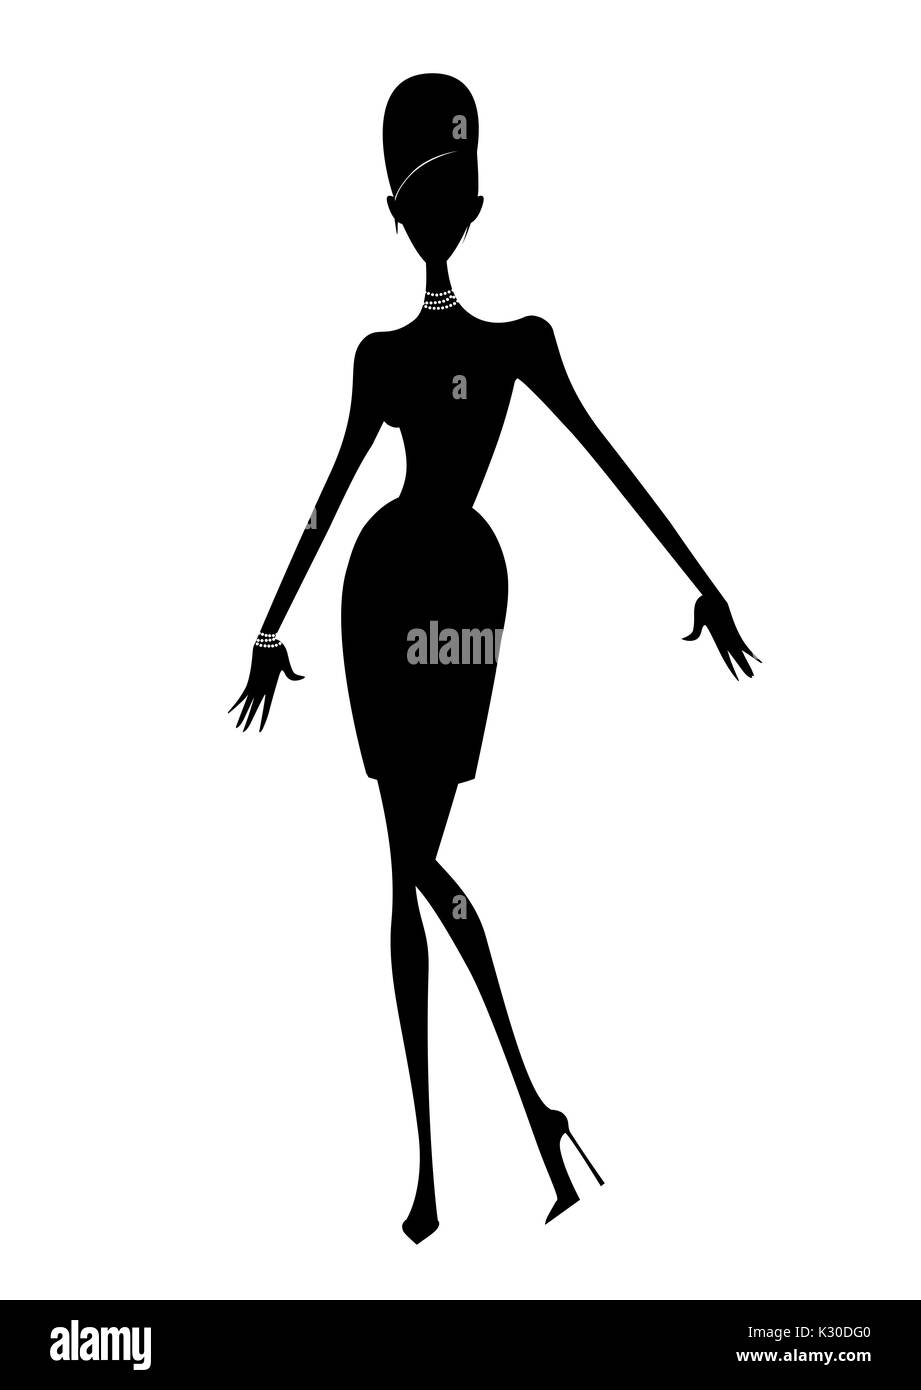 Fashion illustration silhouette  of a chic woman in a short dress Stock Photo